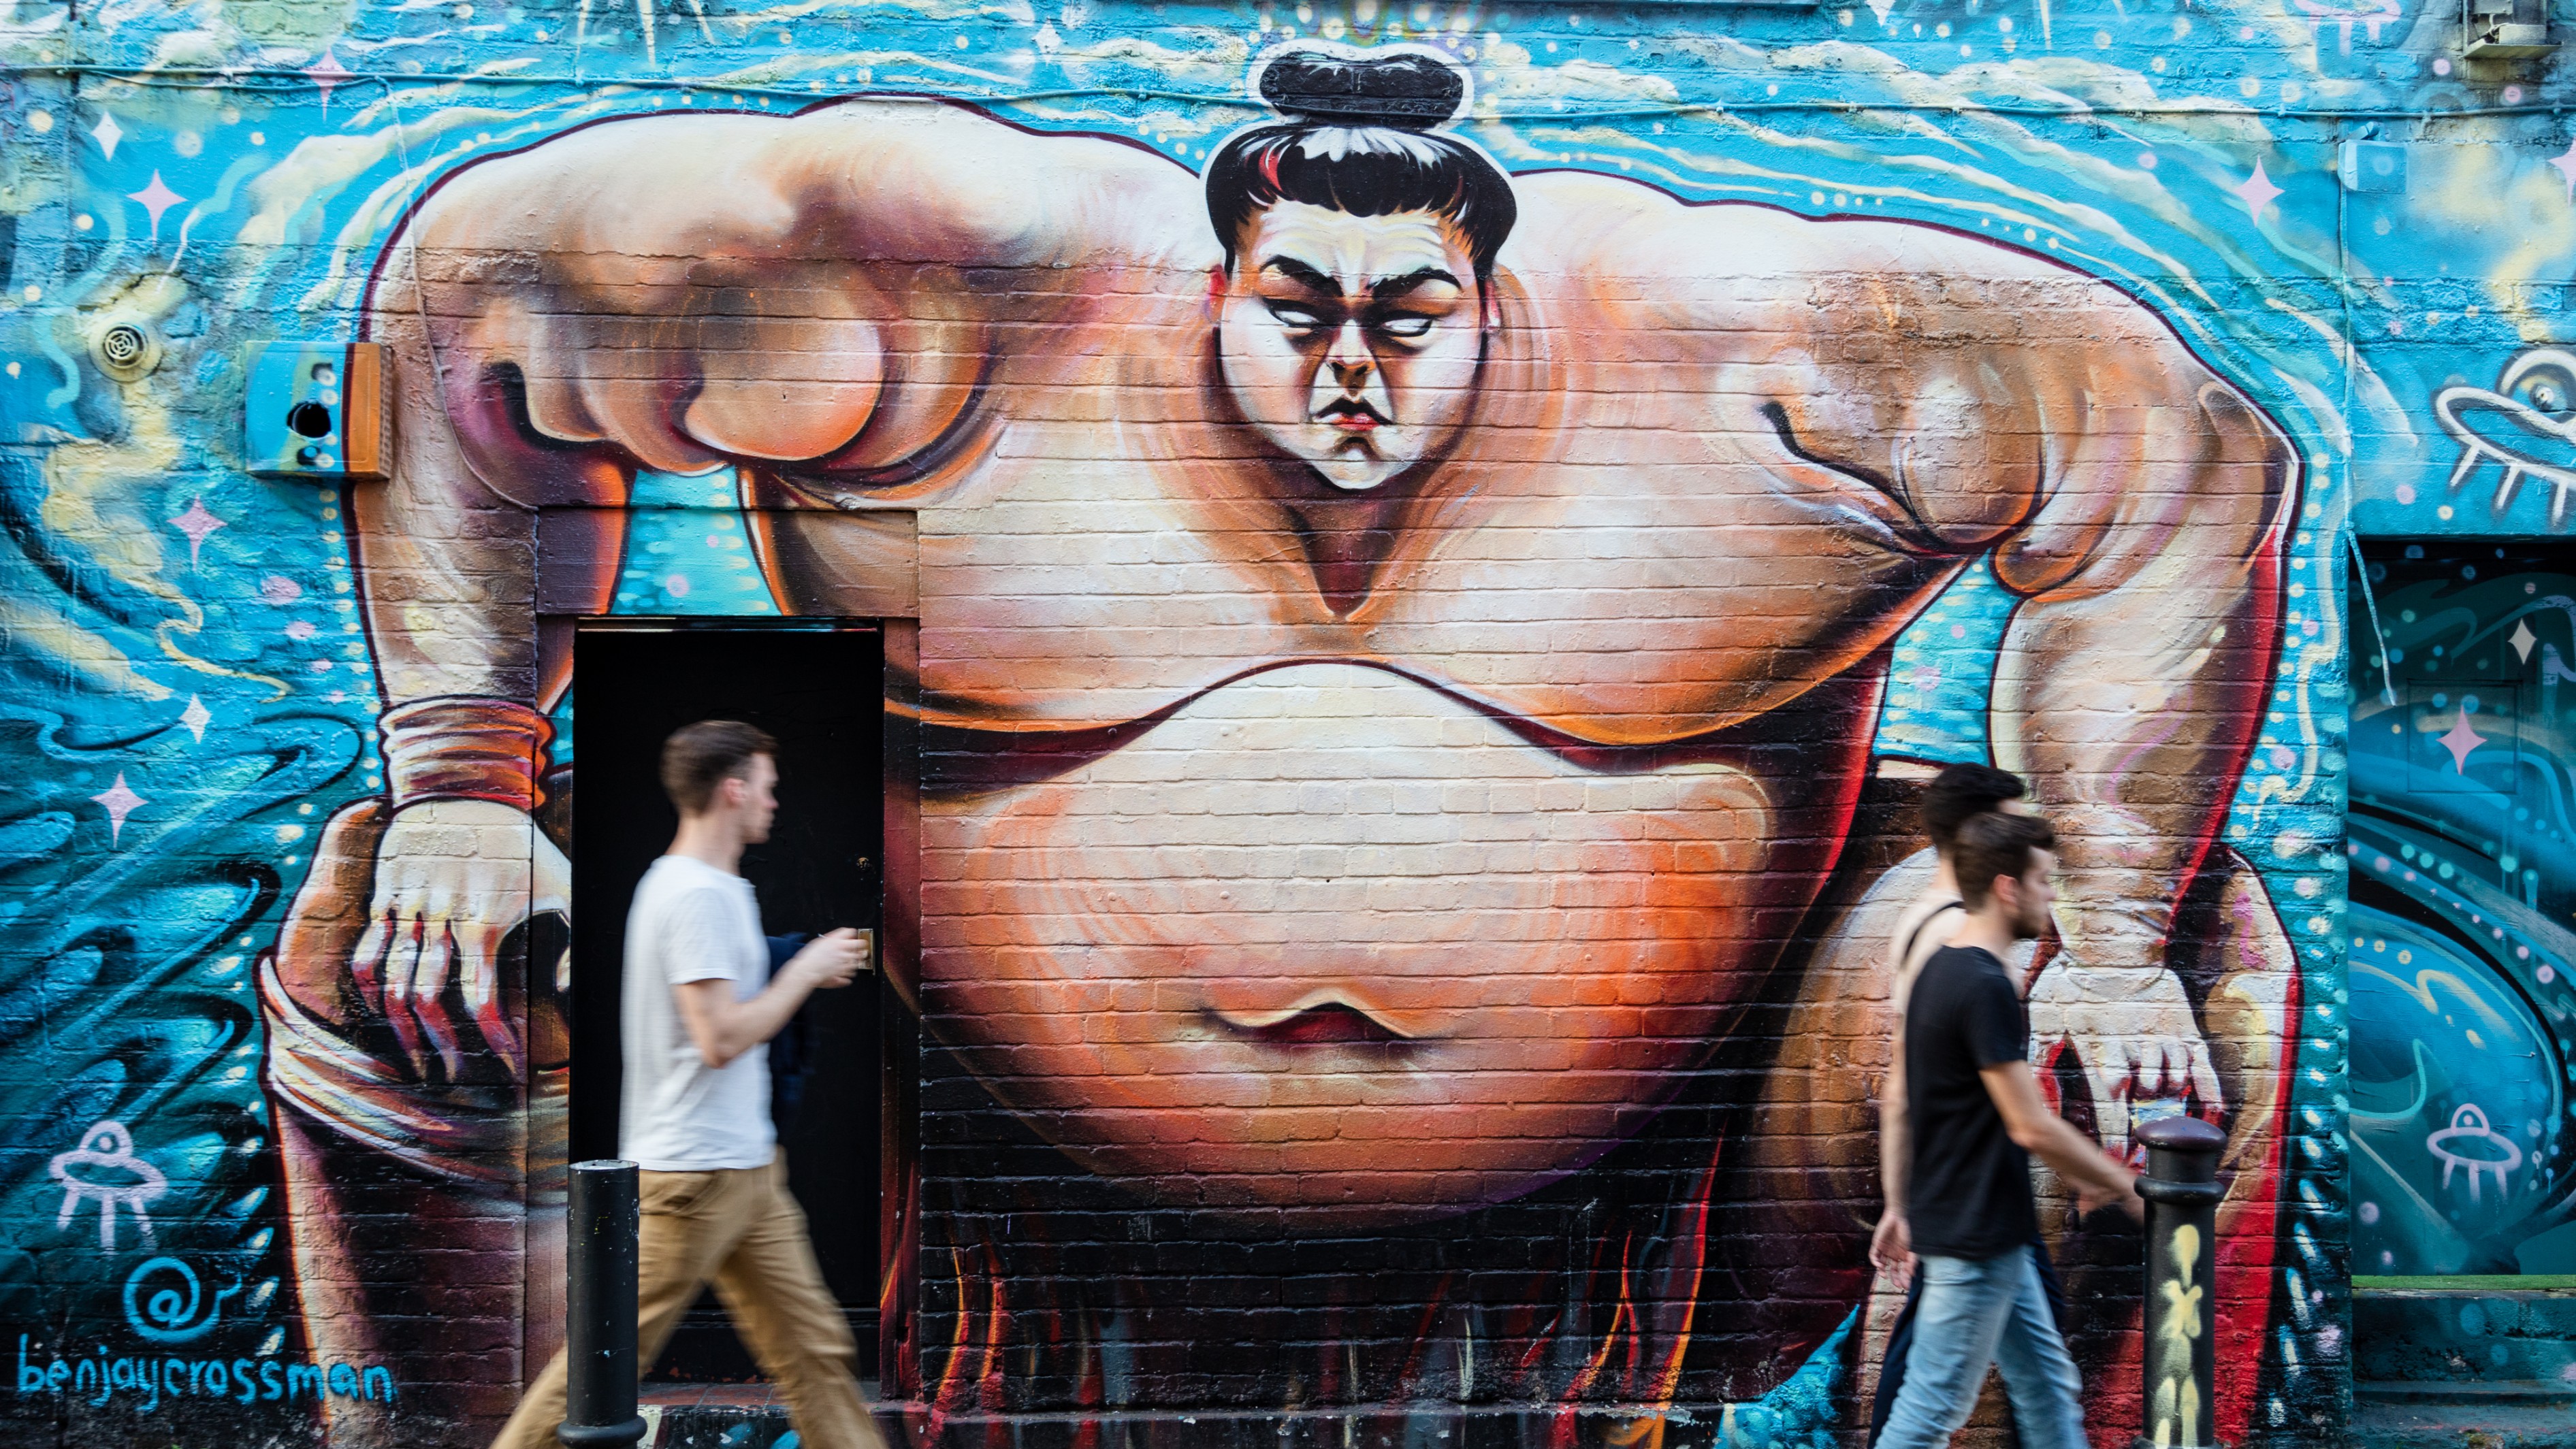 Graffiti mural of a sumo wrestler against a blue background on a brick wall in Spitalfields.